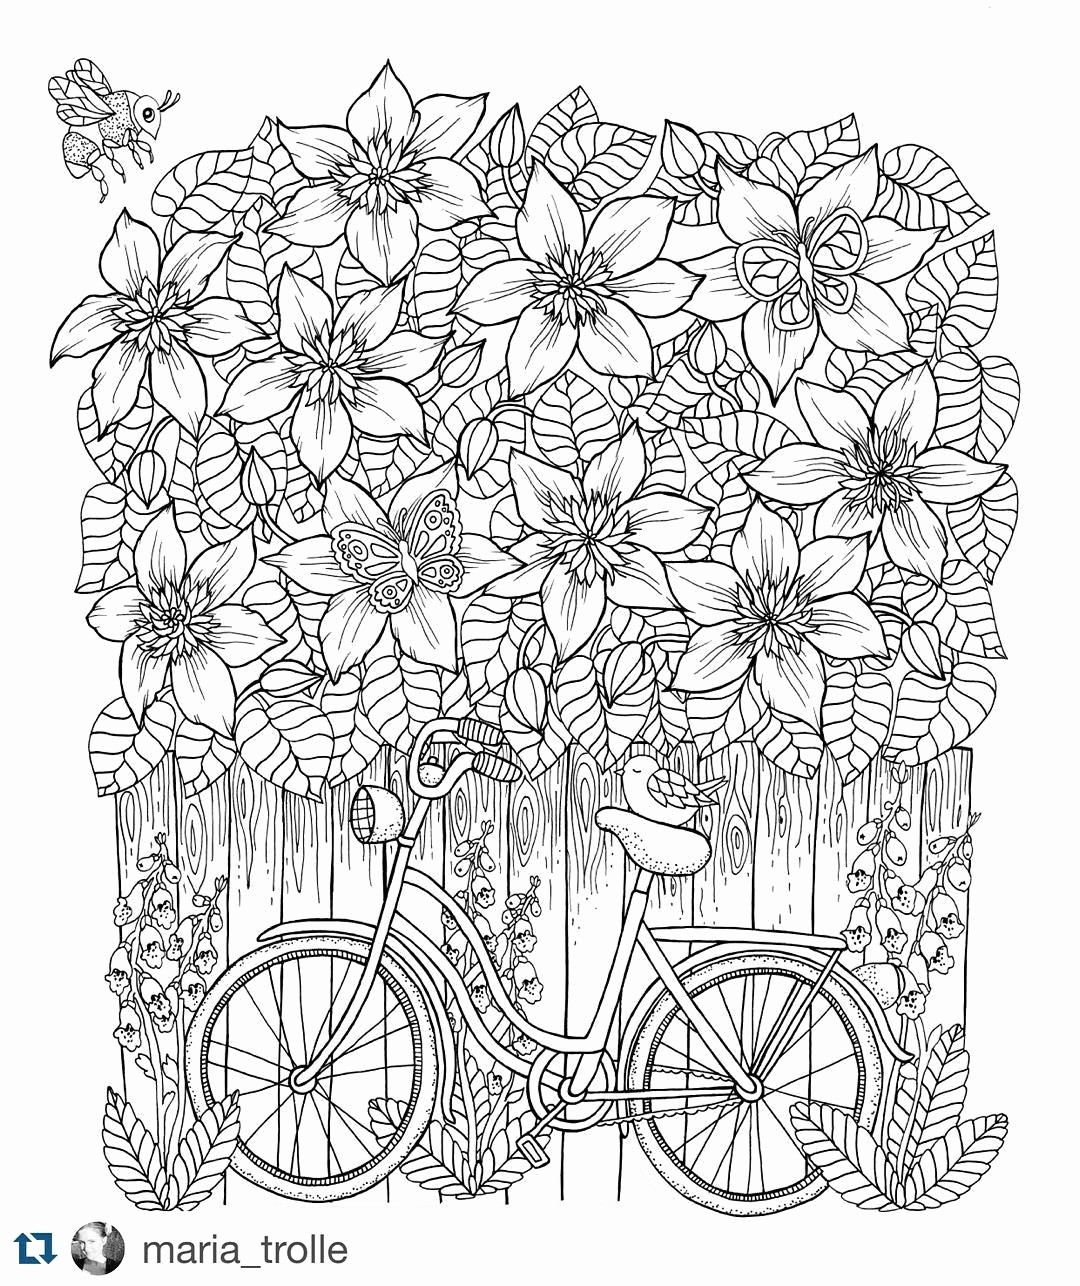 29 Great Seashells In Glass Vase 2024 free download seashells in glass vase of coloring book free new cool vases flower vase coloring page pages throughout coloring book free beautiful coloring pages best of fresh s s media cache ak0 pinimg o